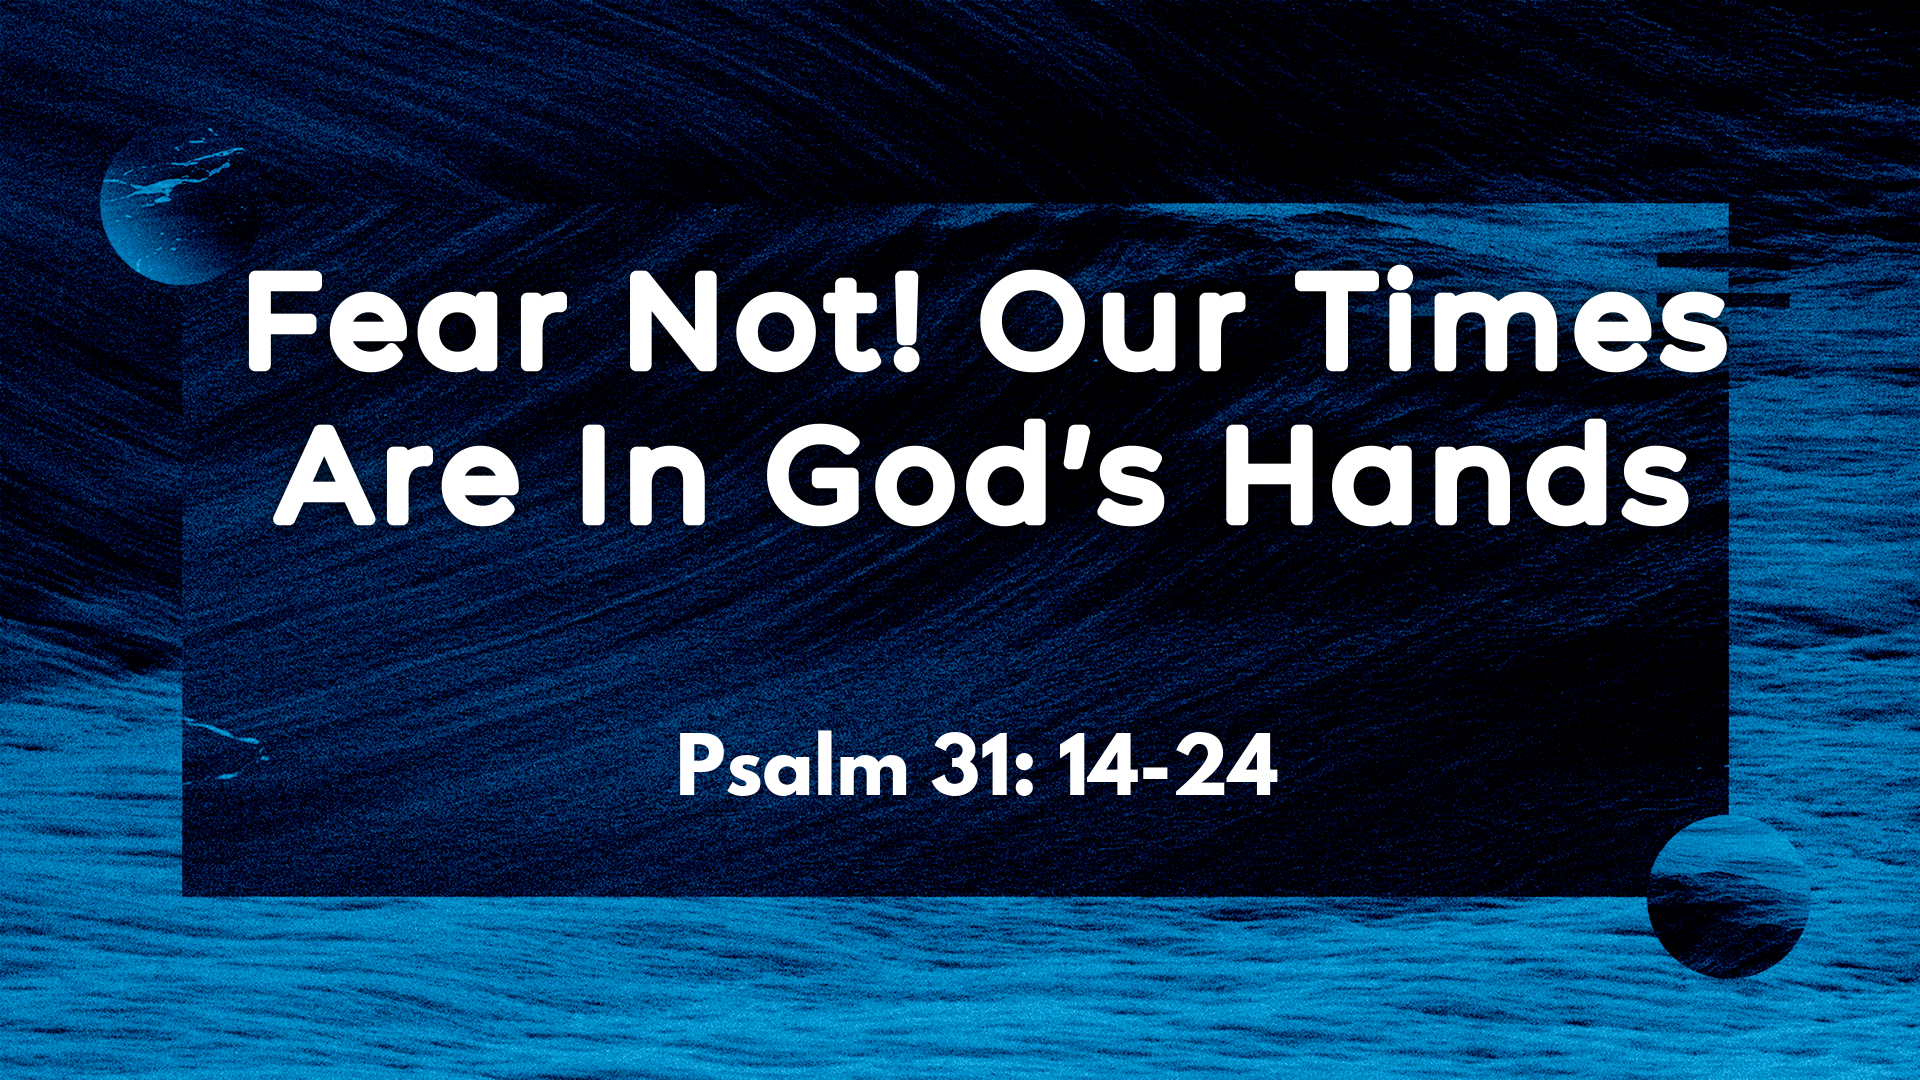 Jan 03, 2021 - Fear Not! Our Times Are In God's Hands (Video) - Psalm 31: 14-24